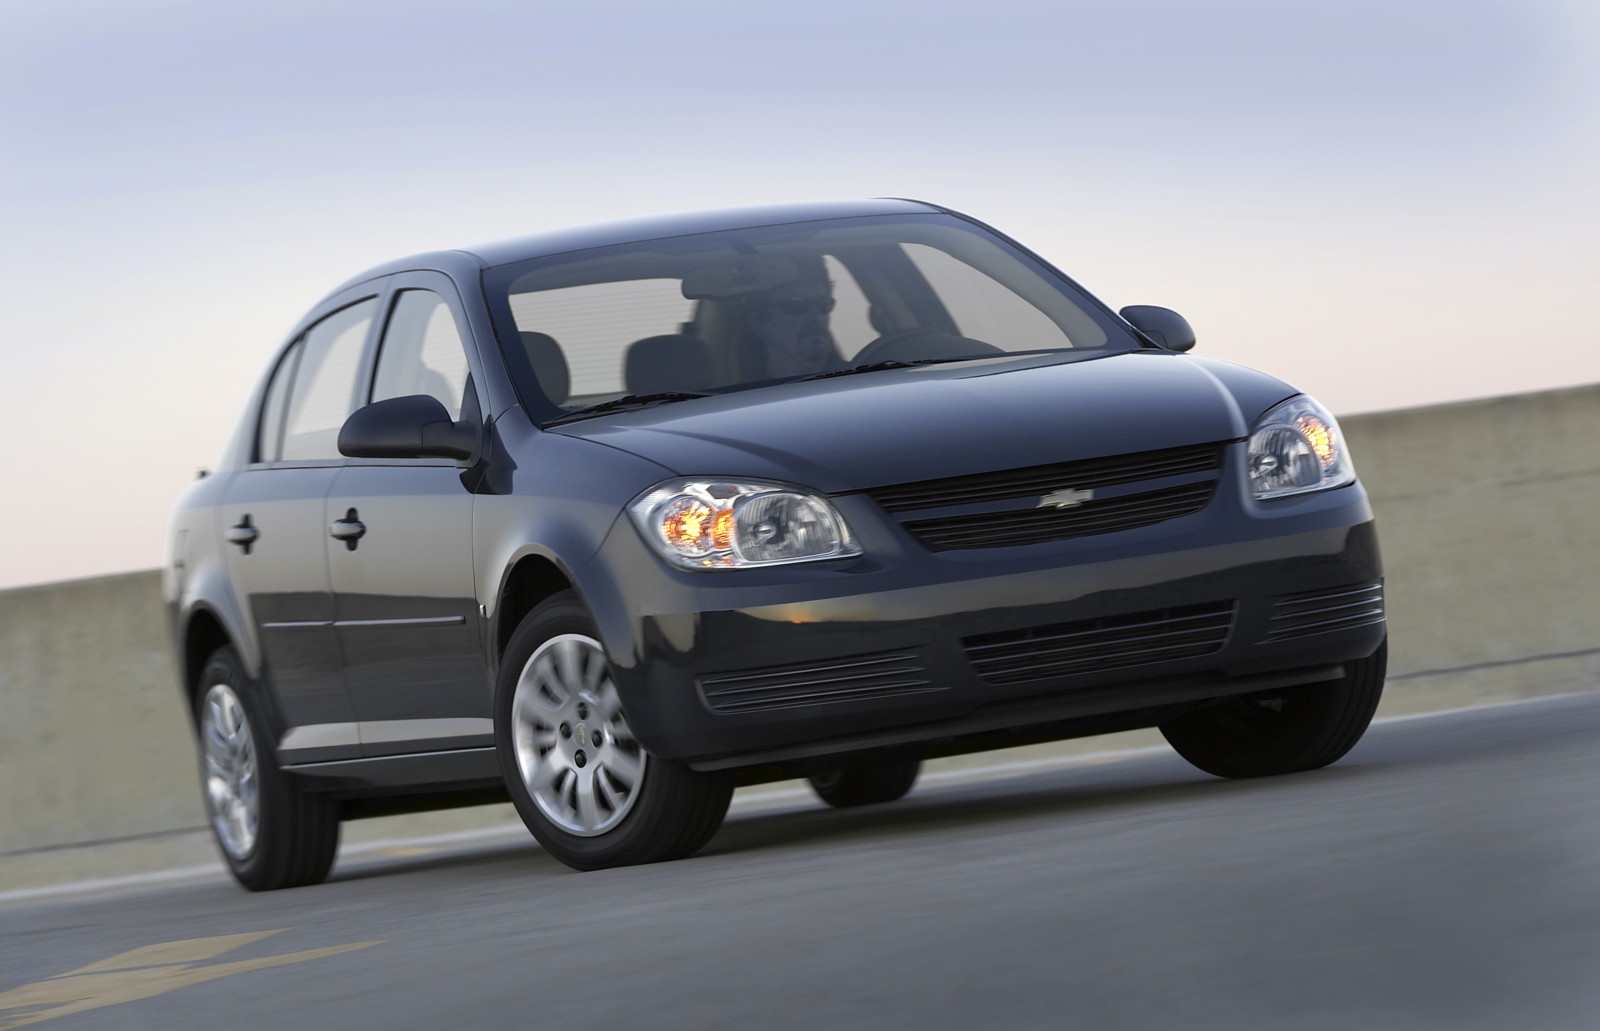 2010 Chevrolet Cobalt Review: Prices, Specs, and Photos - The Car Connection